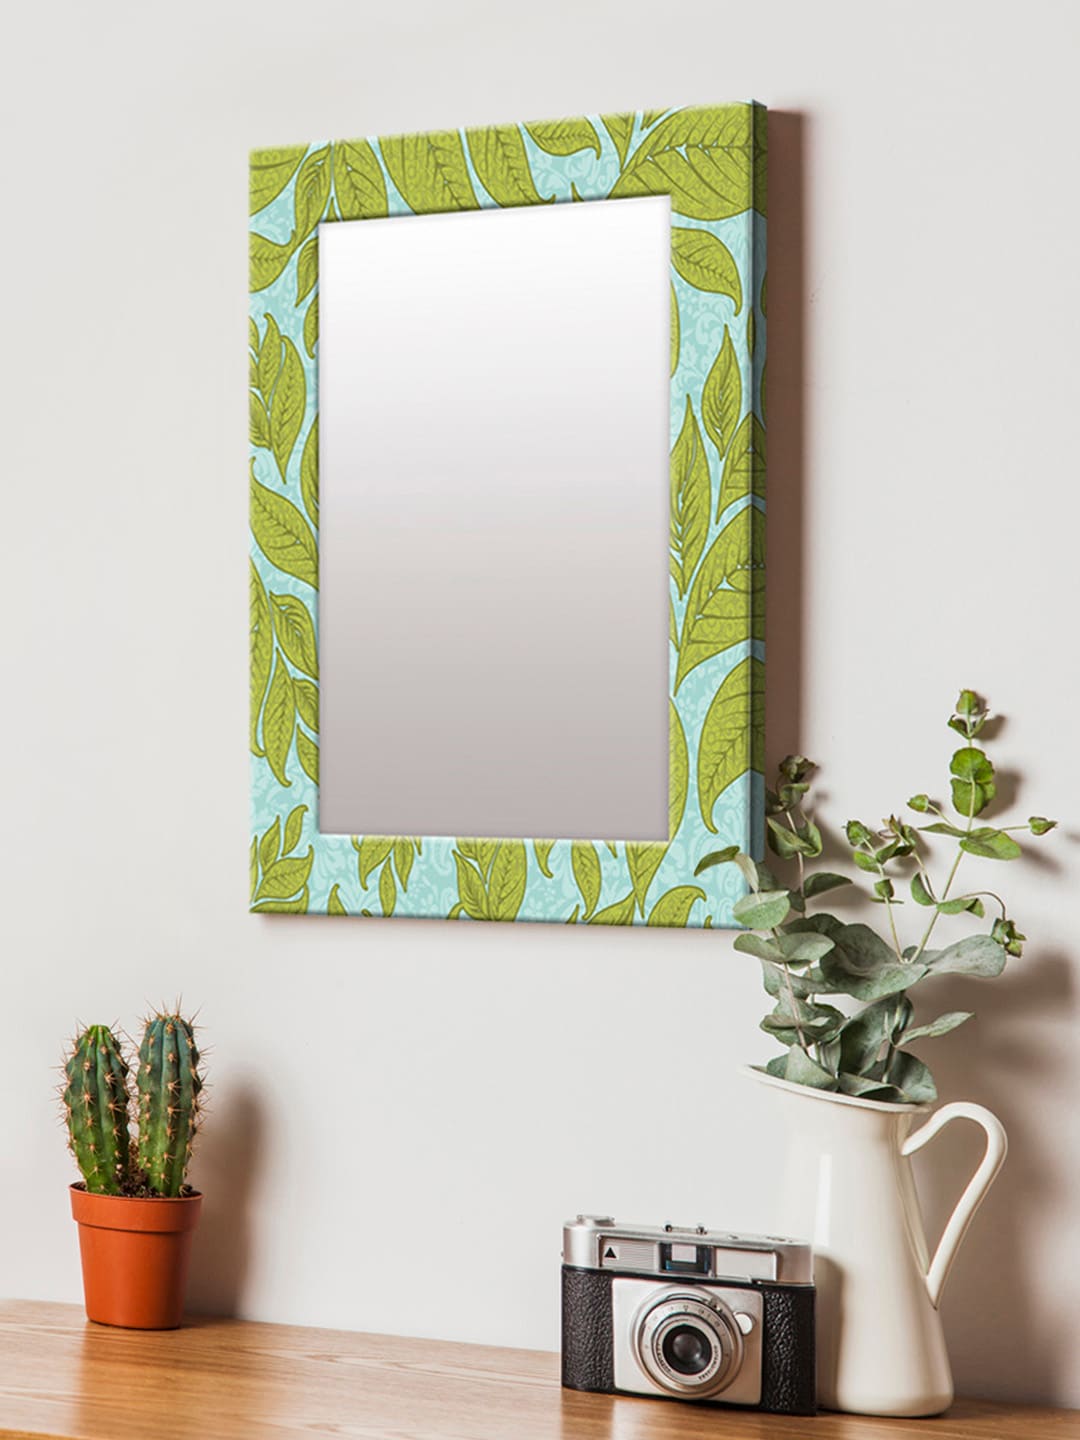 999Store Green & Blue Printed MDF Wall Mirror Price in India